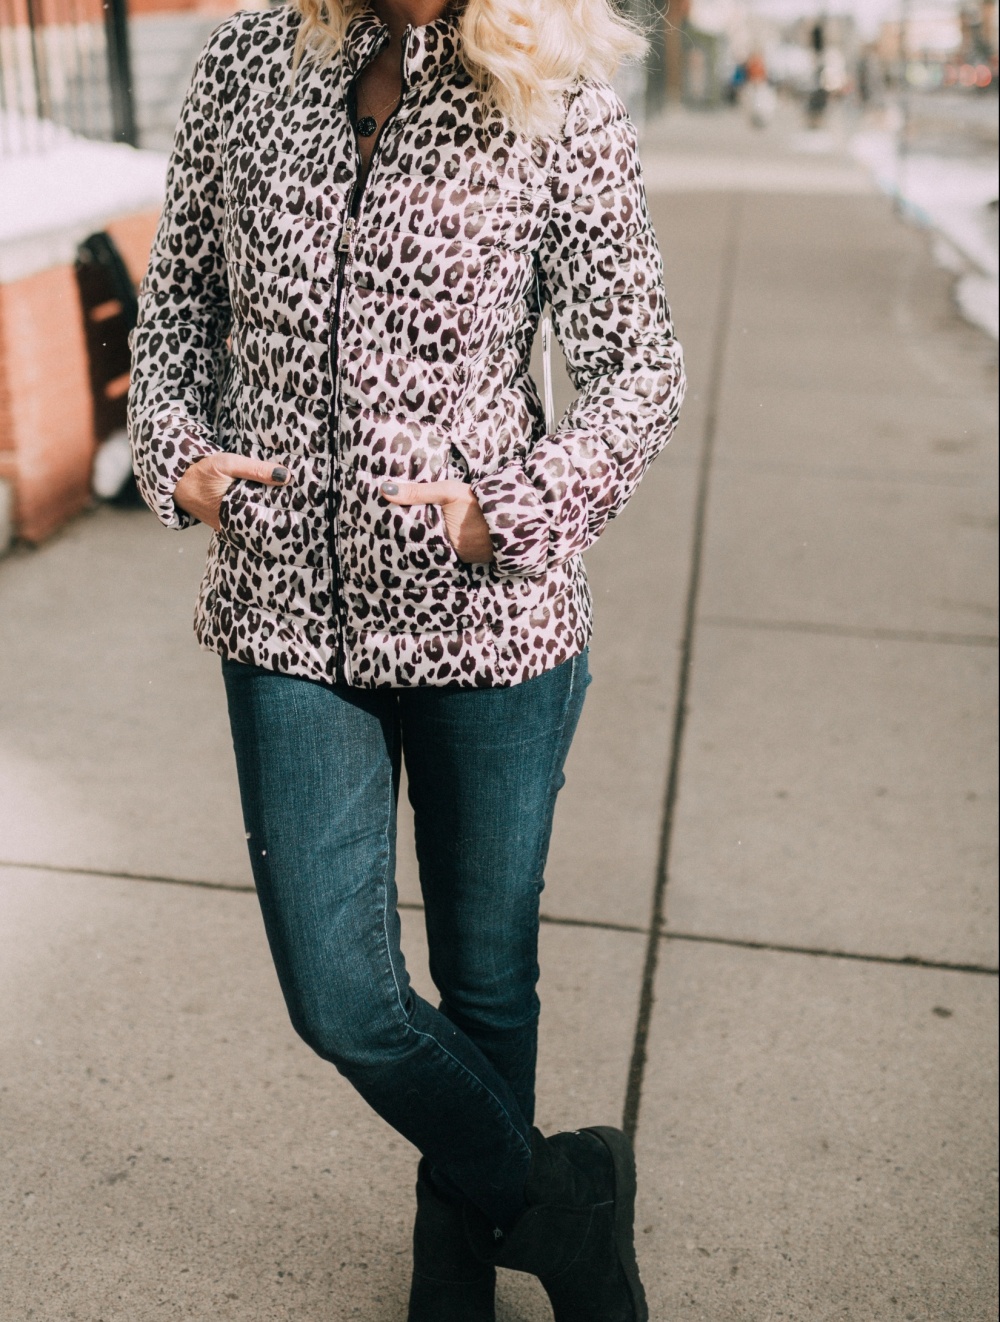 Fashion blogger Erin Busbee of BusbeeStyle.com wearing a leopard puffer jacket by Aqua from Bloomingdale's in Telluride, CO